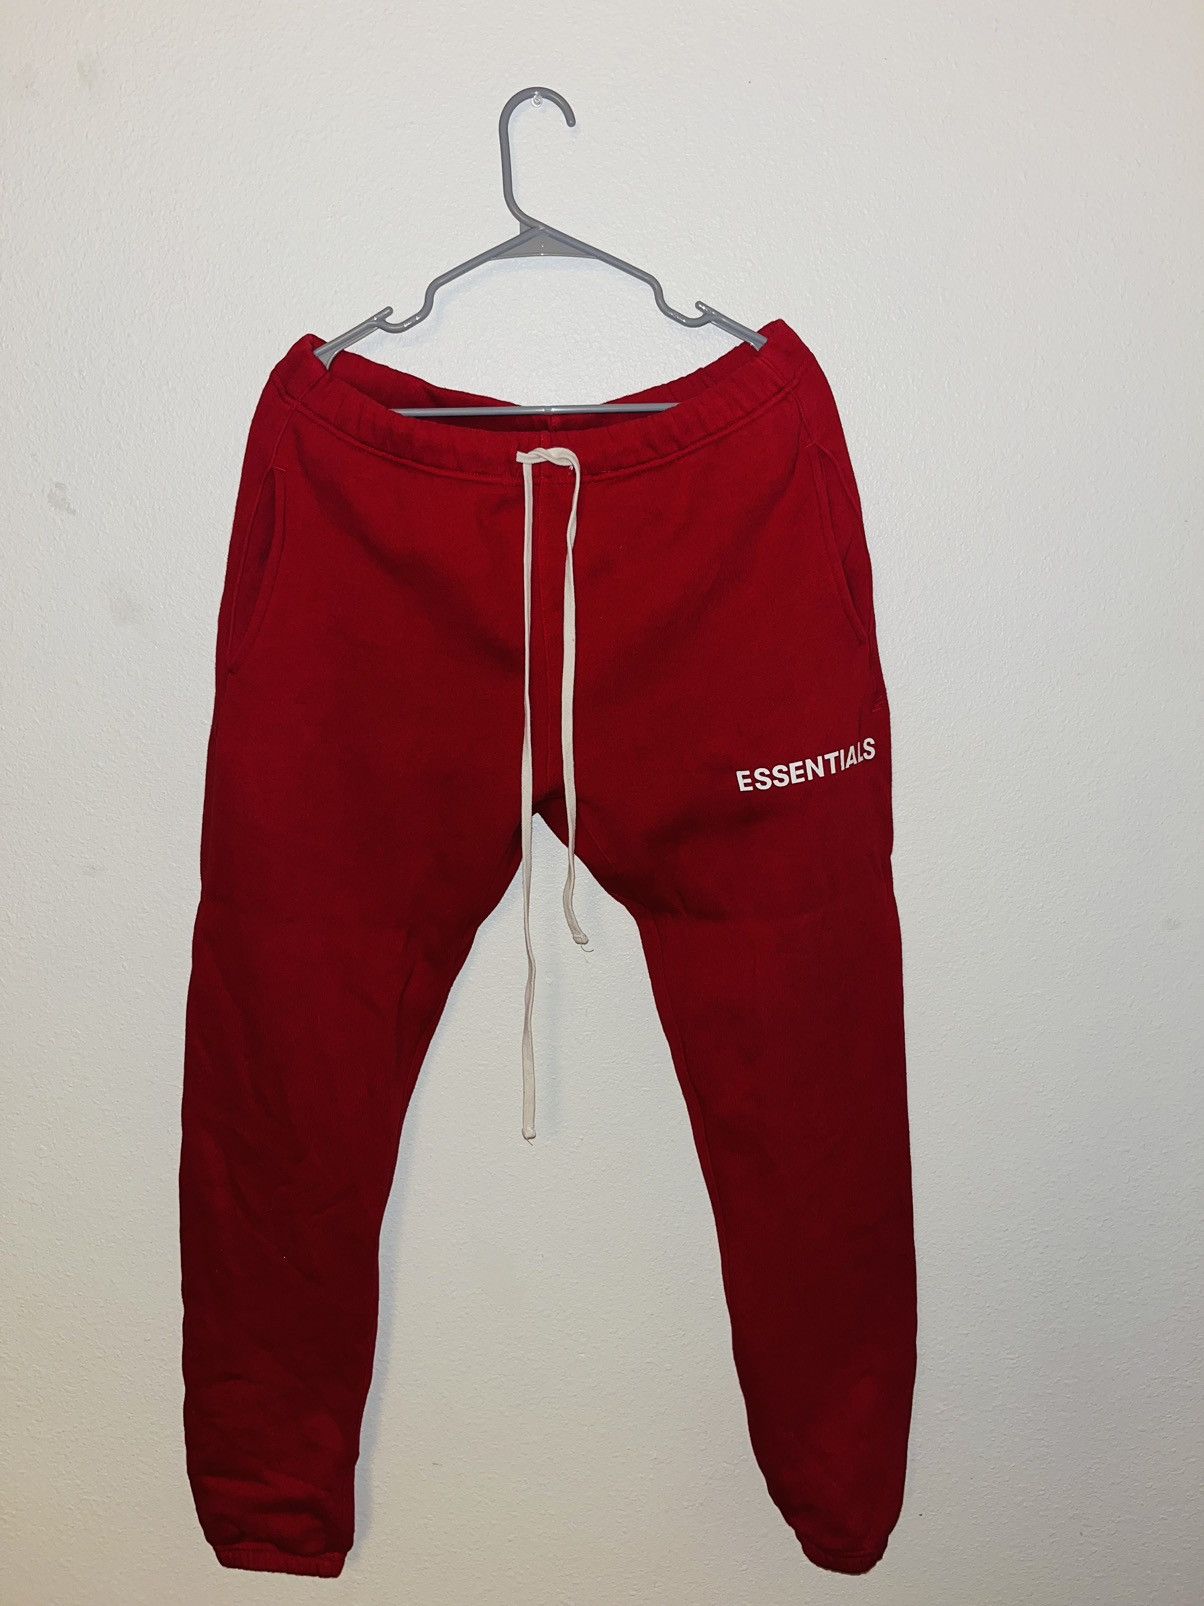 Fear of God RED ESSENTIALS SWEATPANTS FW18 | Grailed